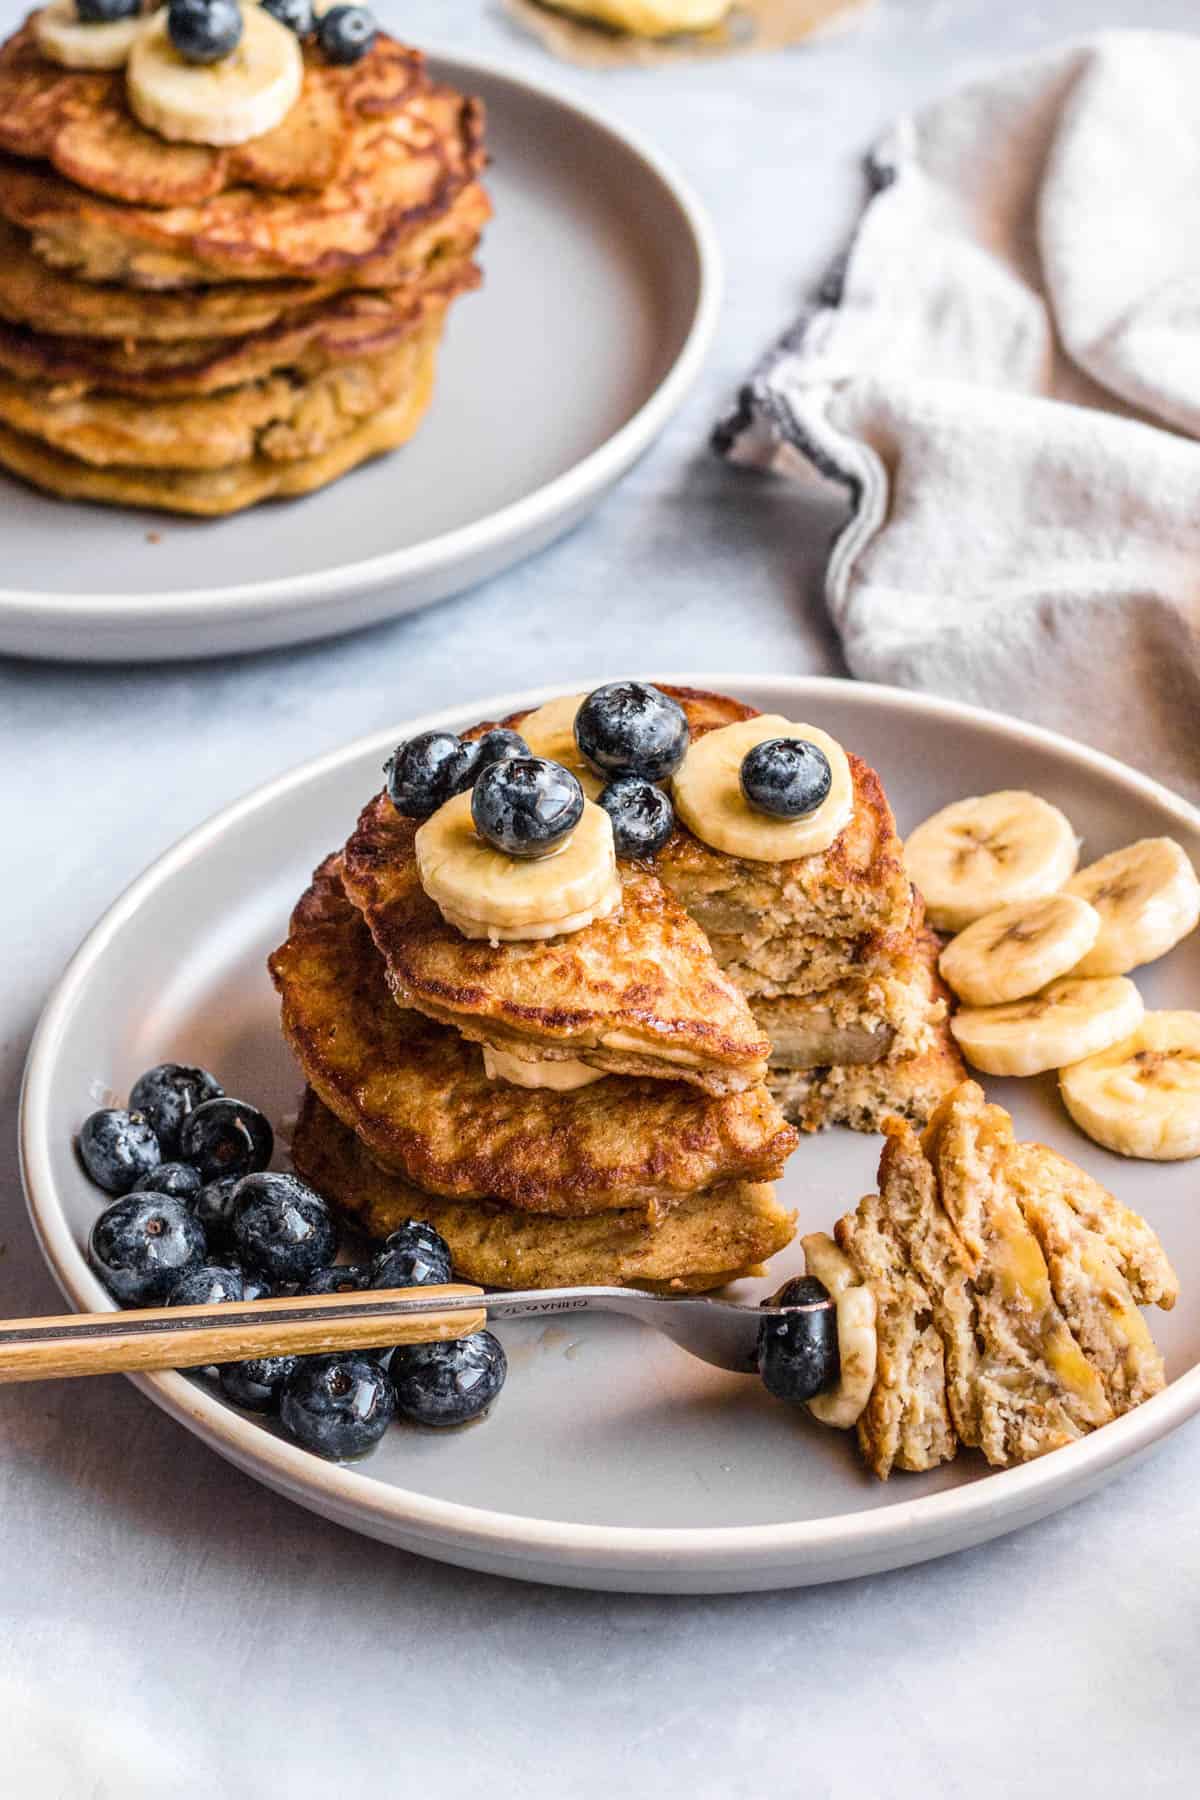 Two plates with stacks of pancakes on top of them and sliced bananas and blueberries.